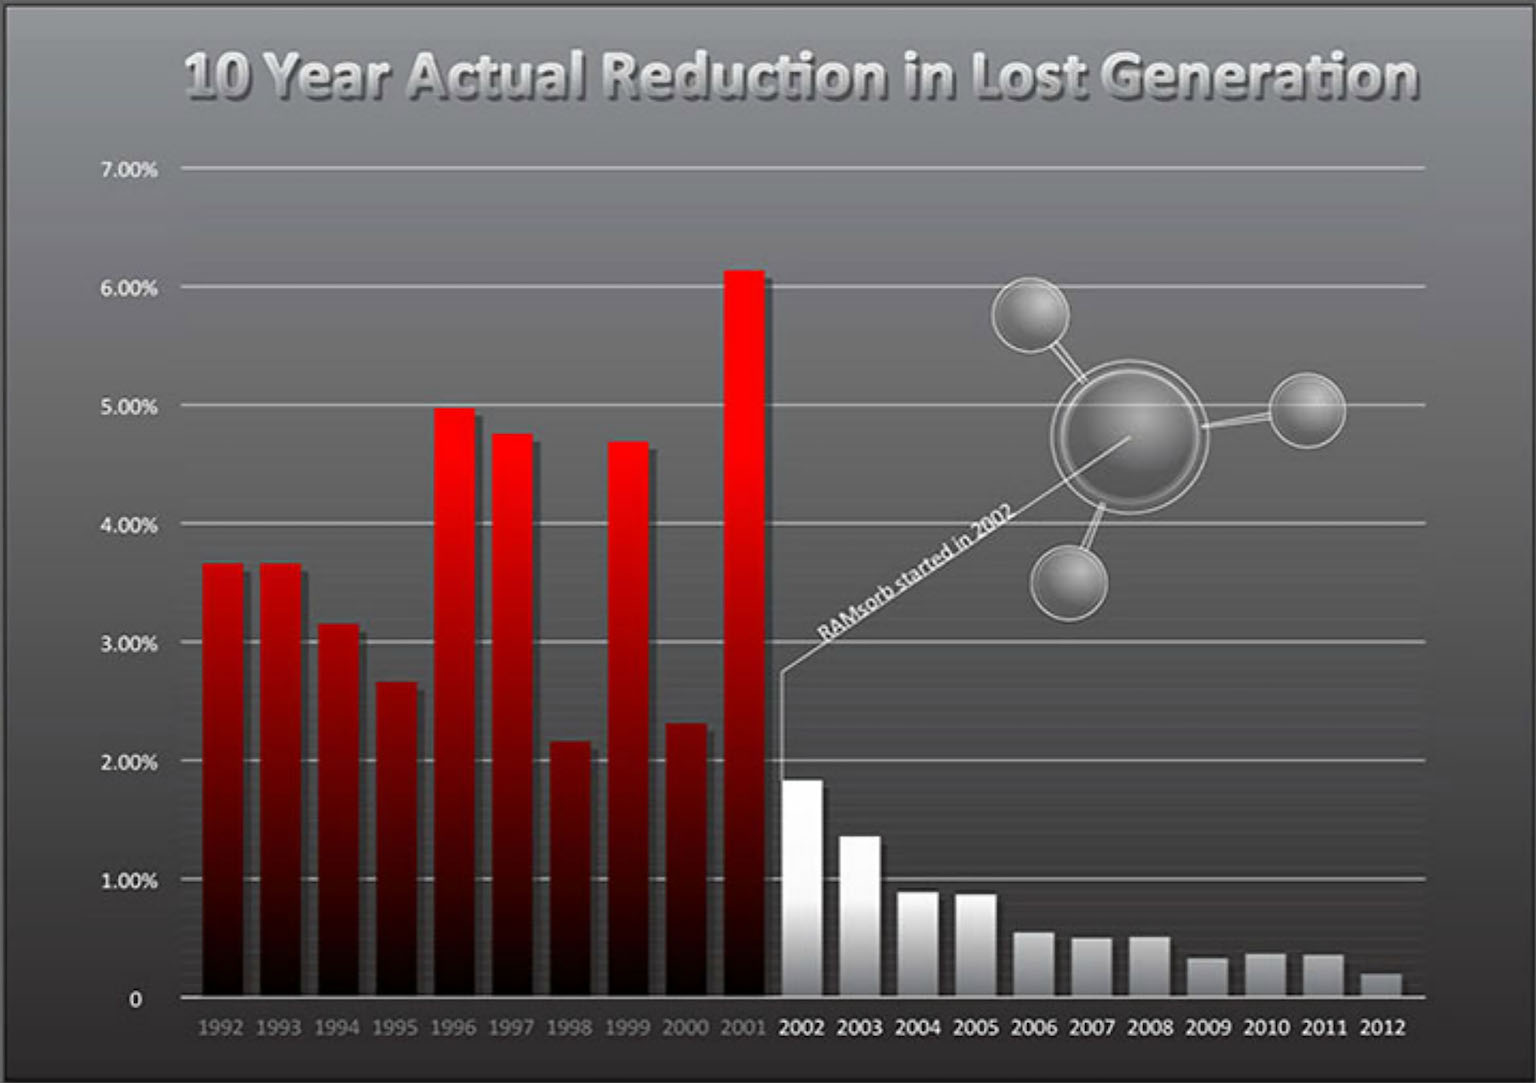 Chart showing 10 Year Actual Reduction in Lost Generation